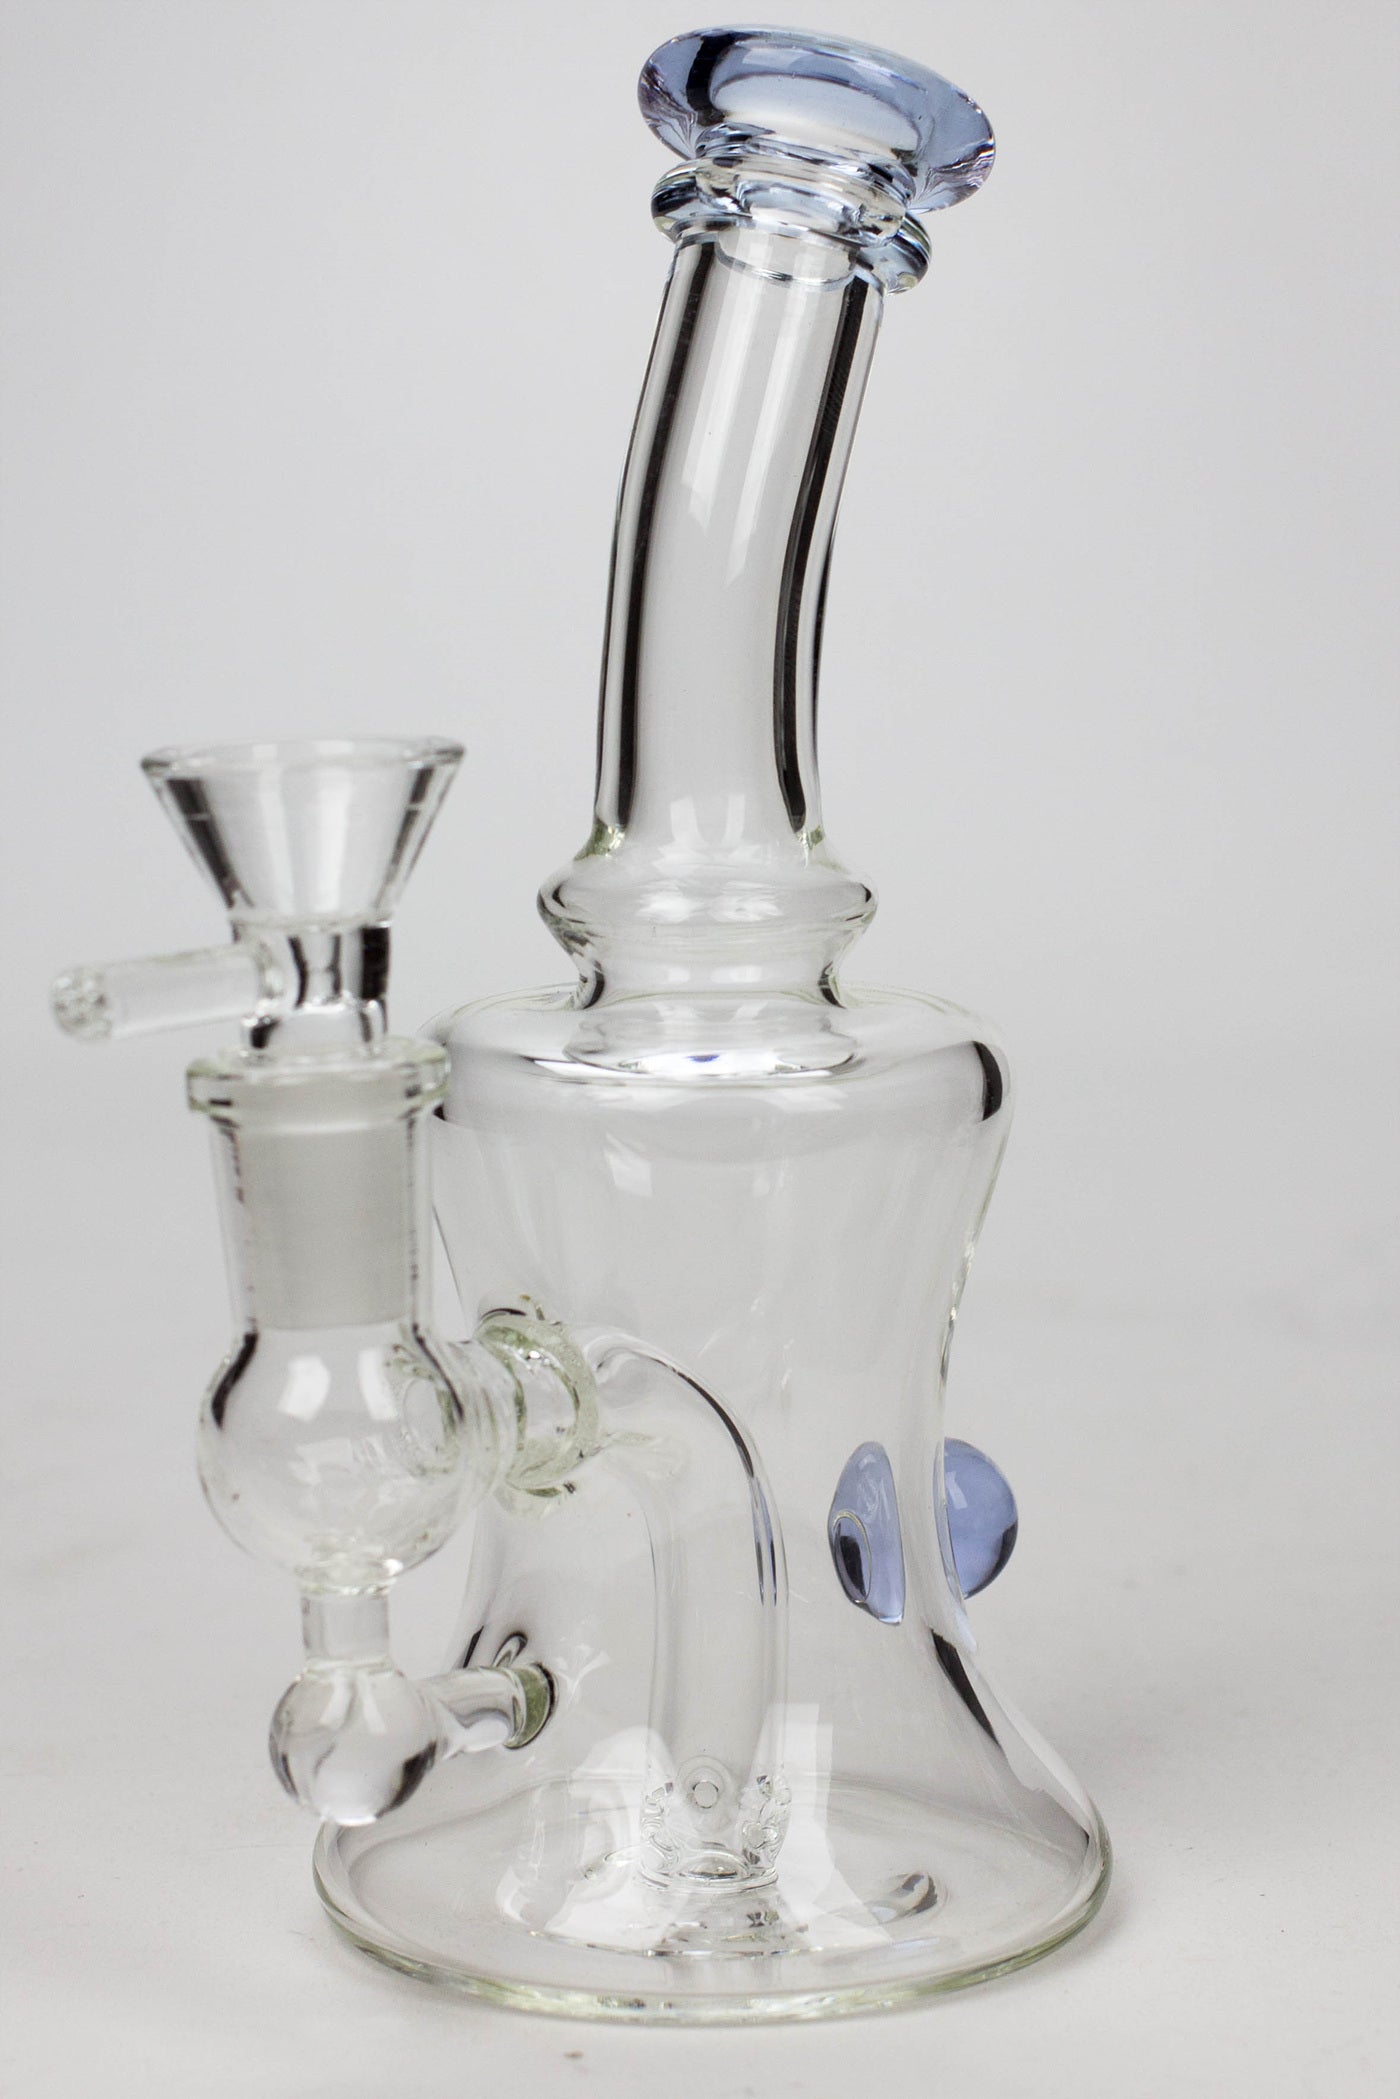 6" 2-in-1 fixed 3 hole diffuser Skirt bubbler_10